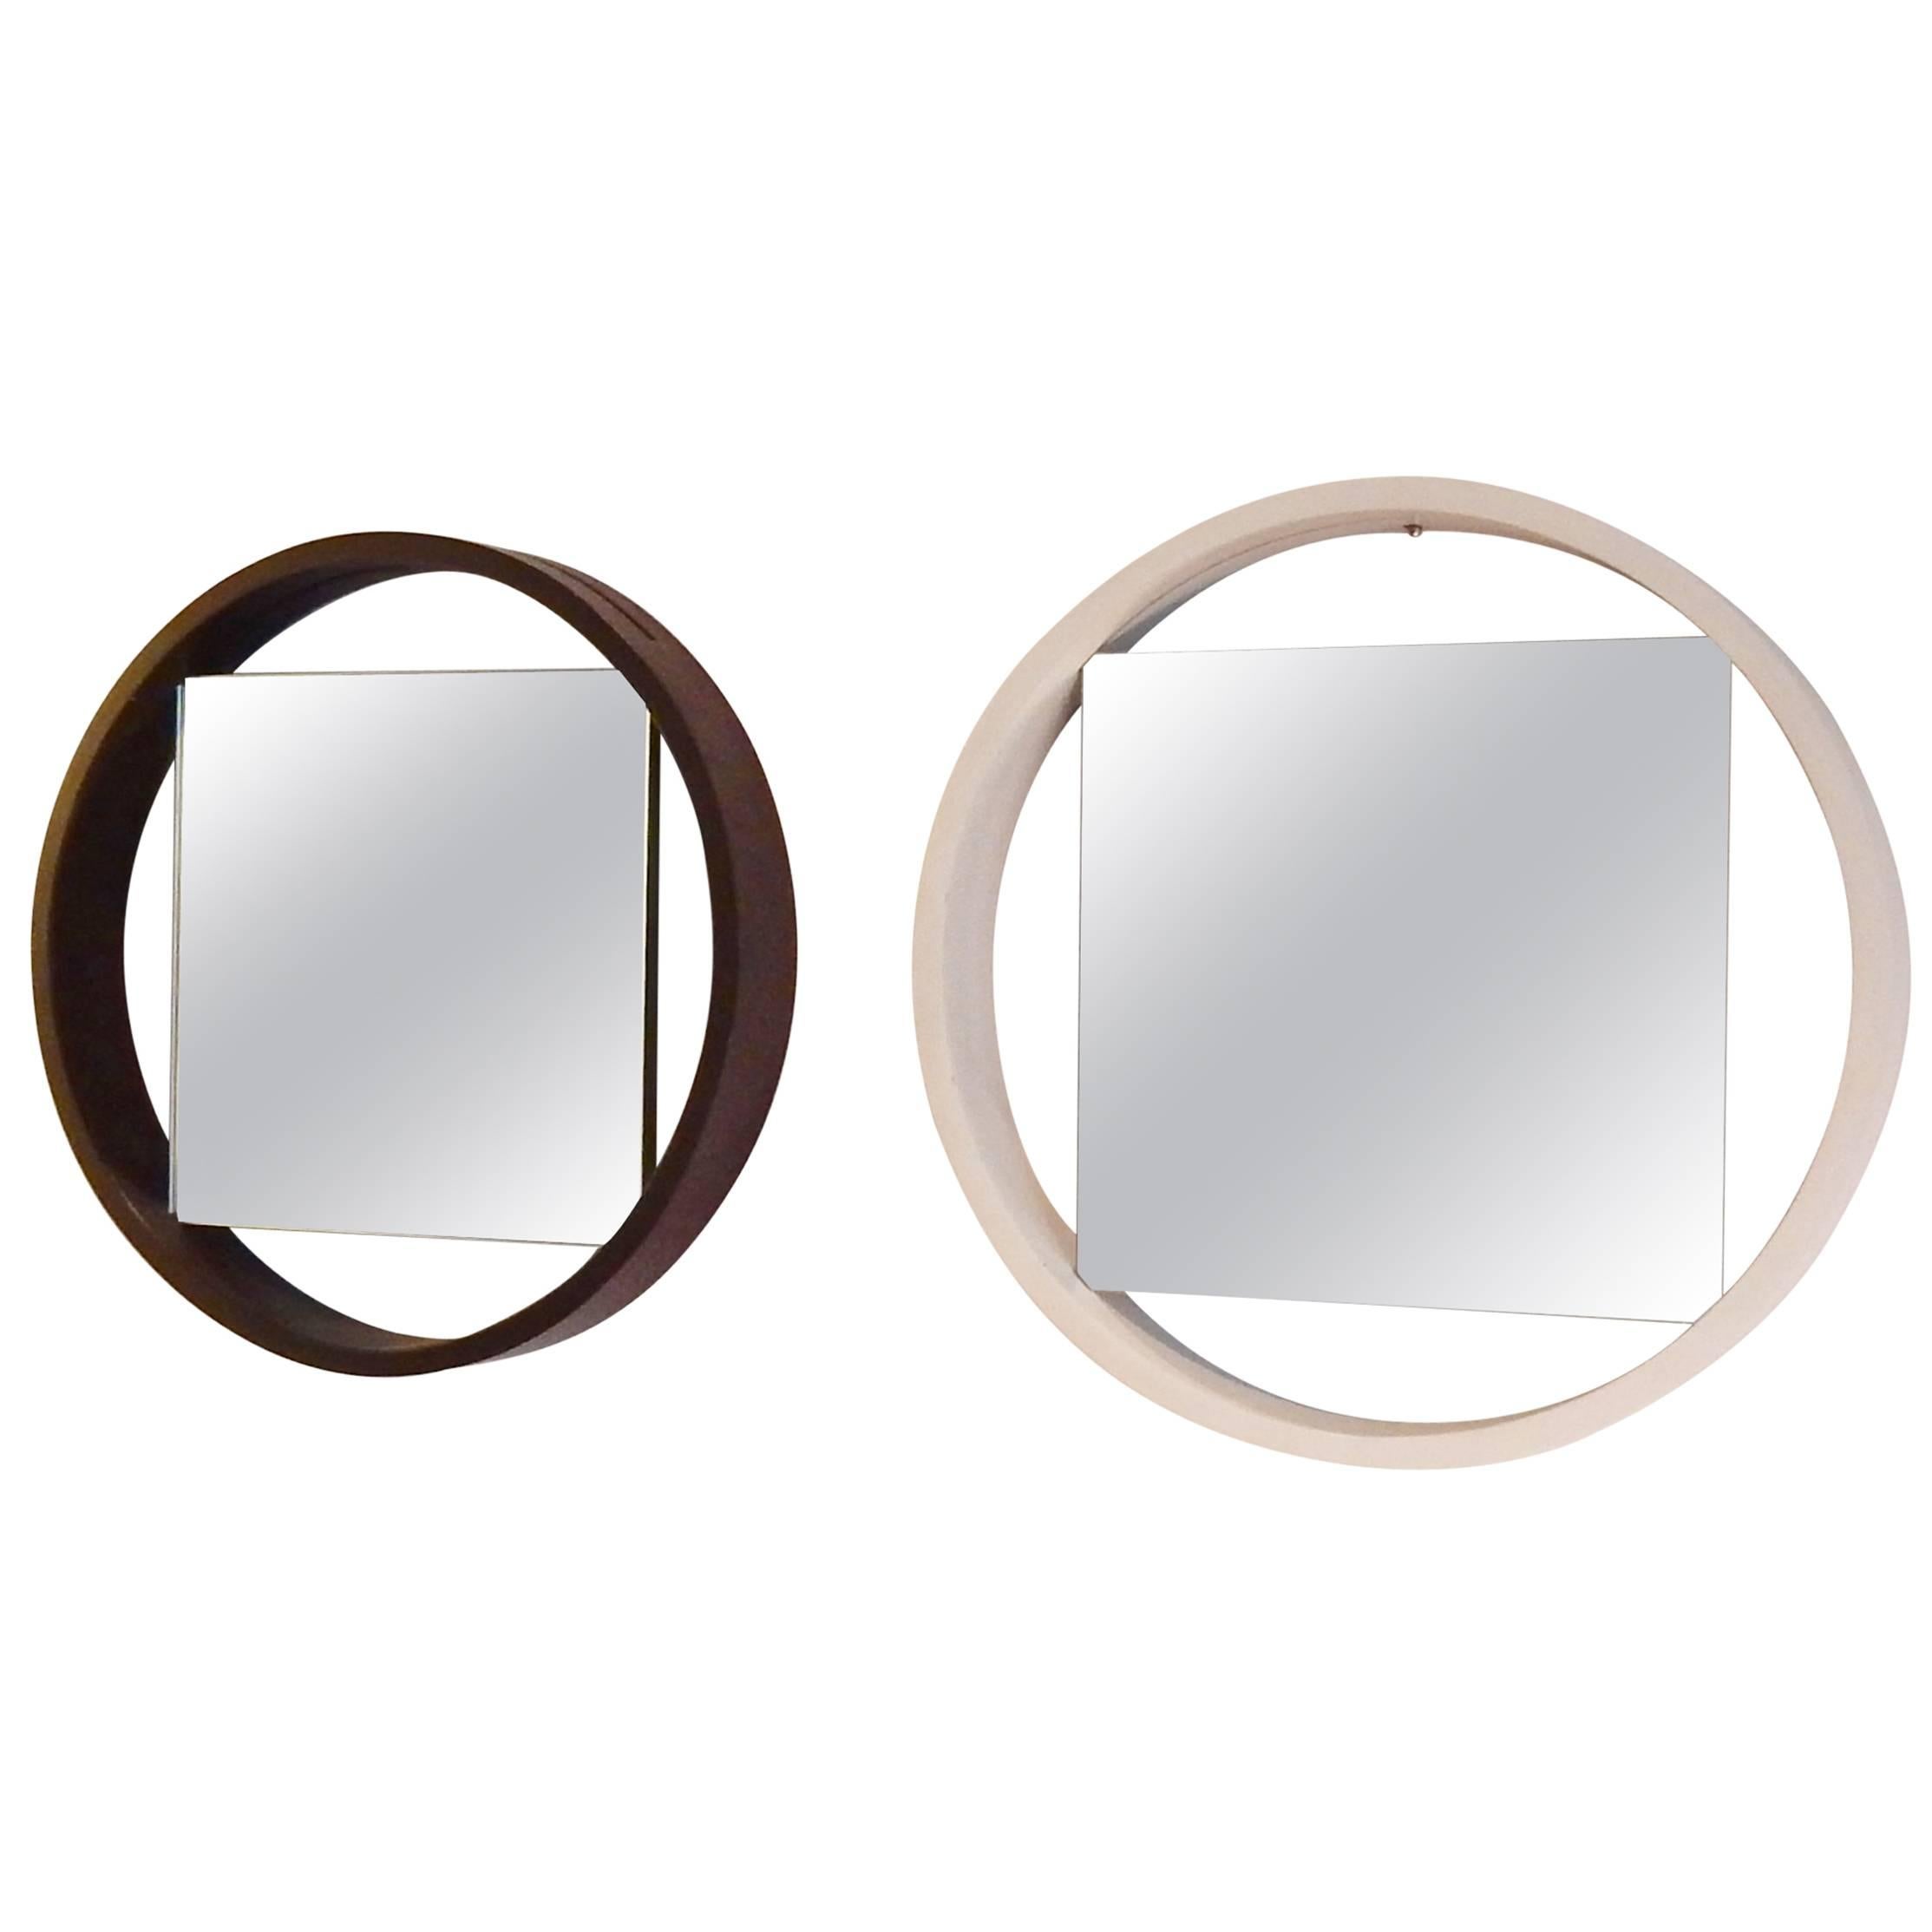 Iconic 1950s Black and White Modernist Mirror by Benno Premsela for 't Spectrum